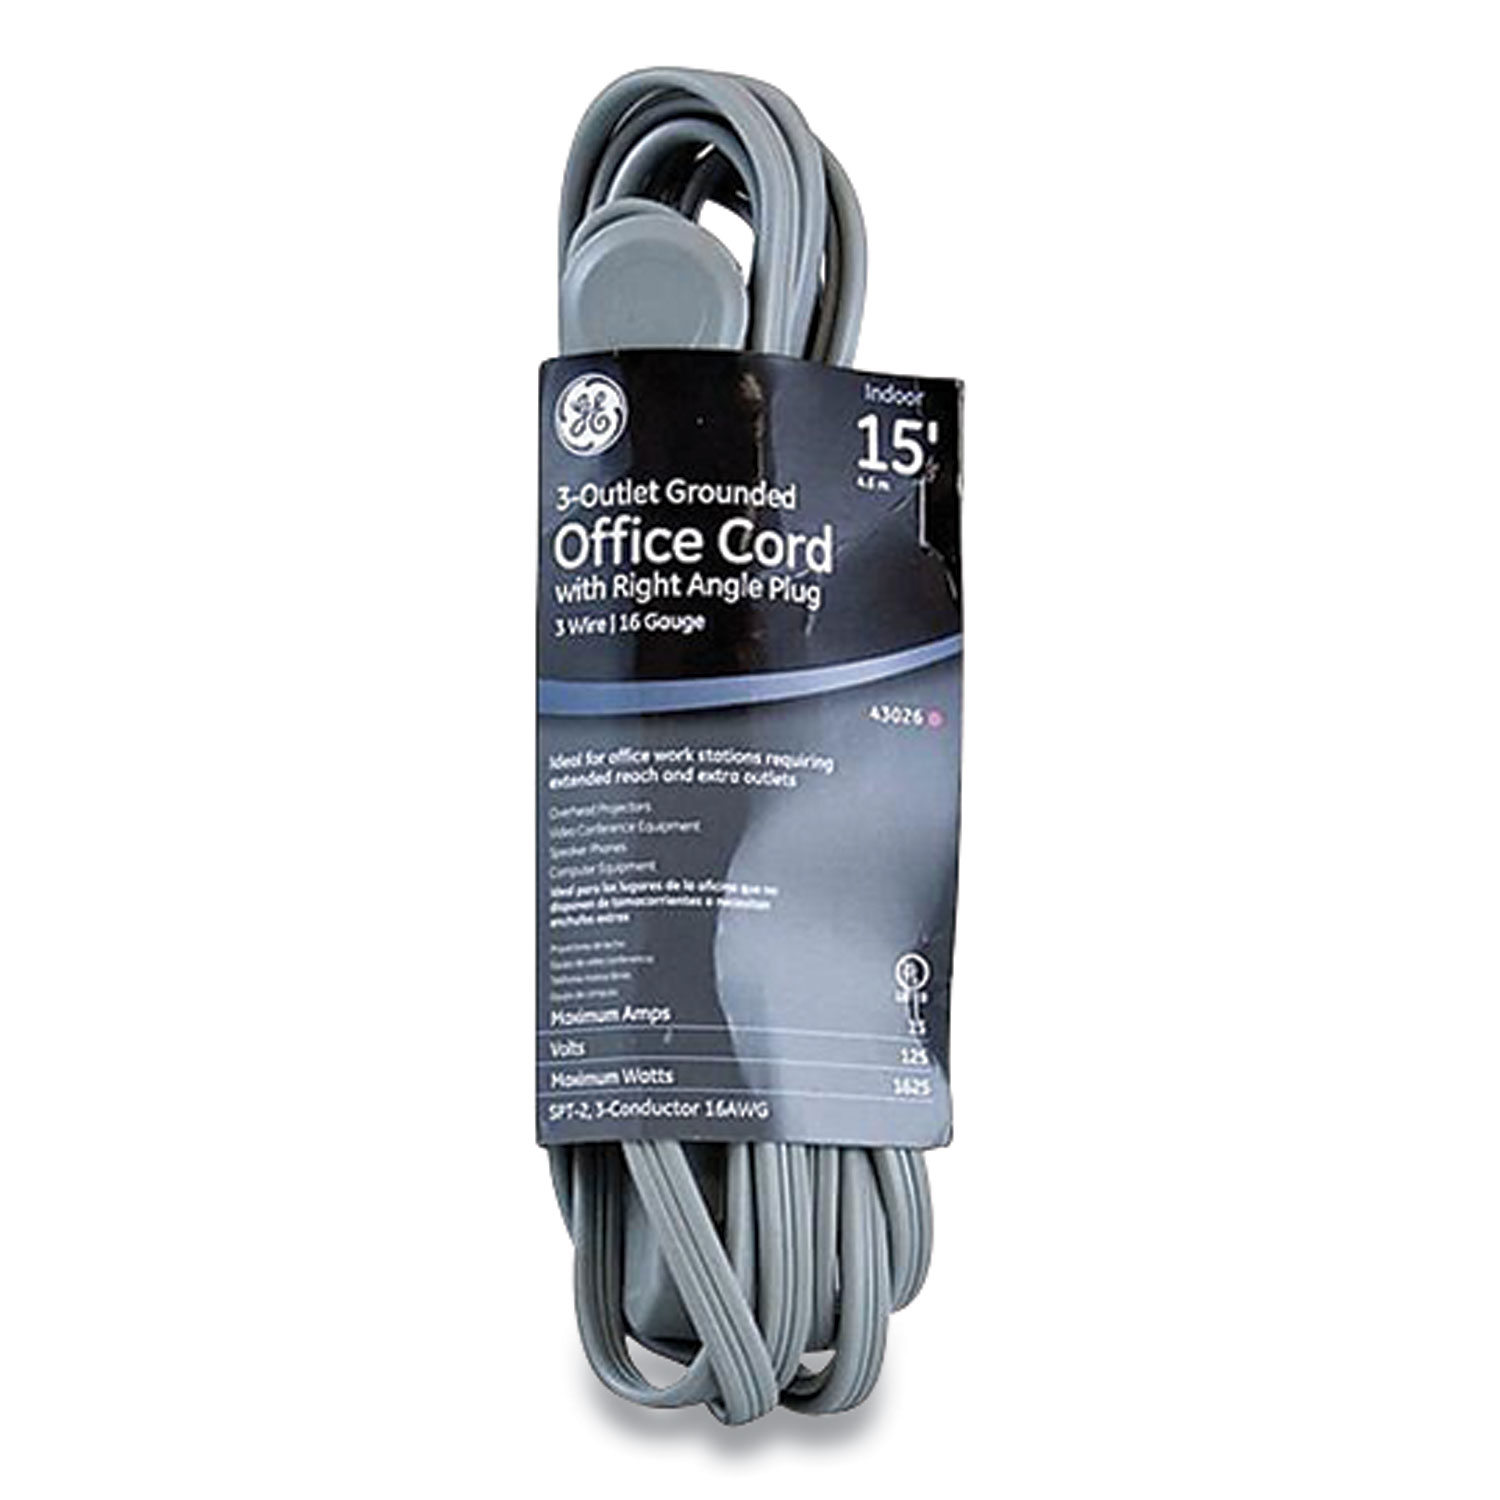  GE 43018 Three Outlet Power Strip, 15 ft Cord, Gray (GEL452812) 